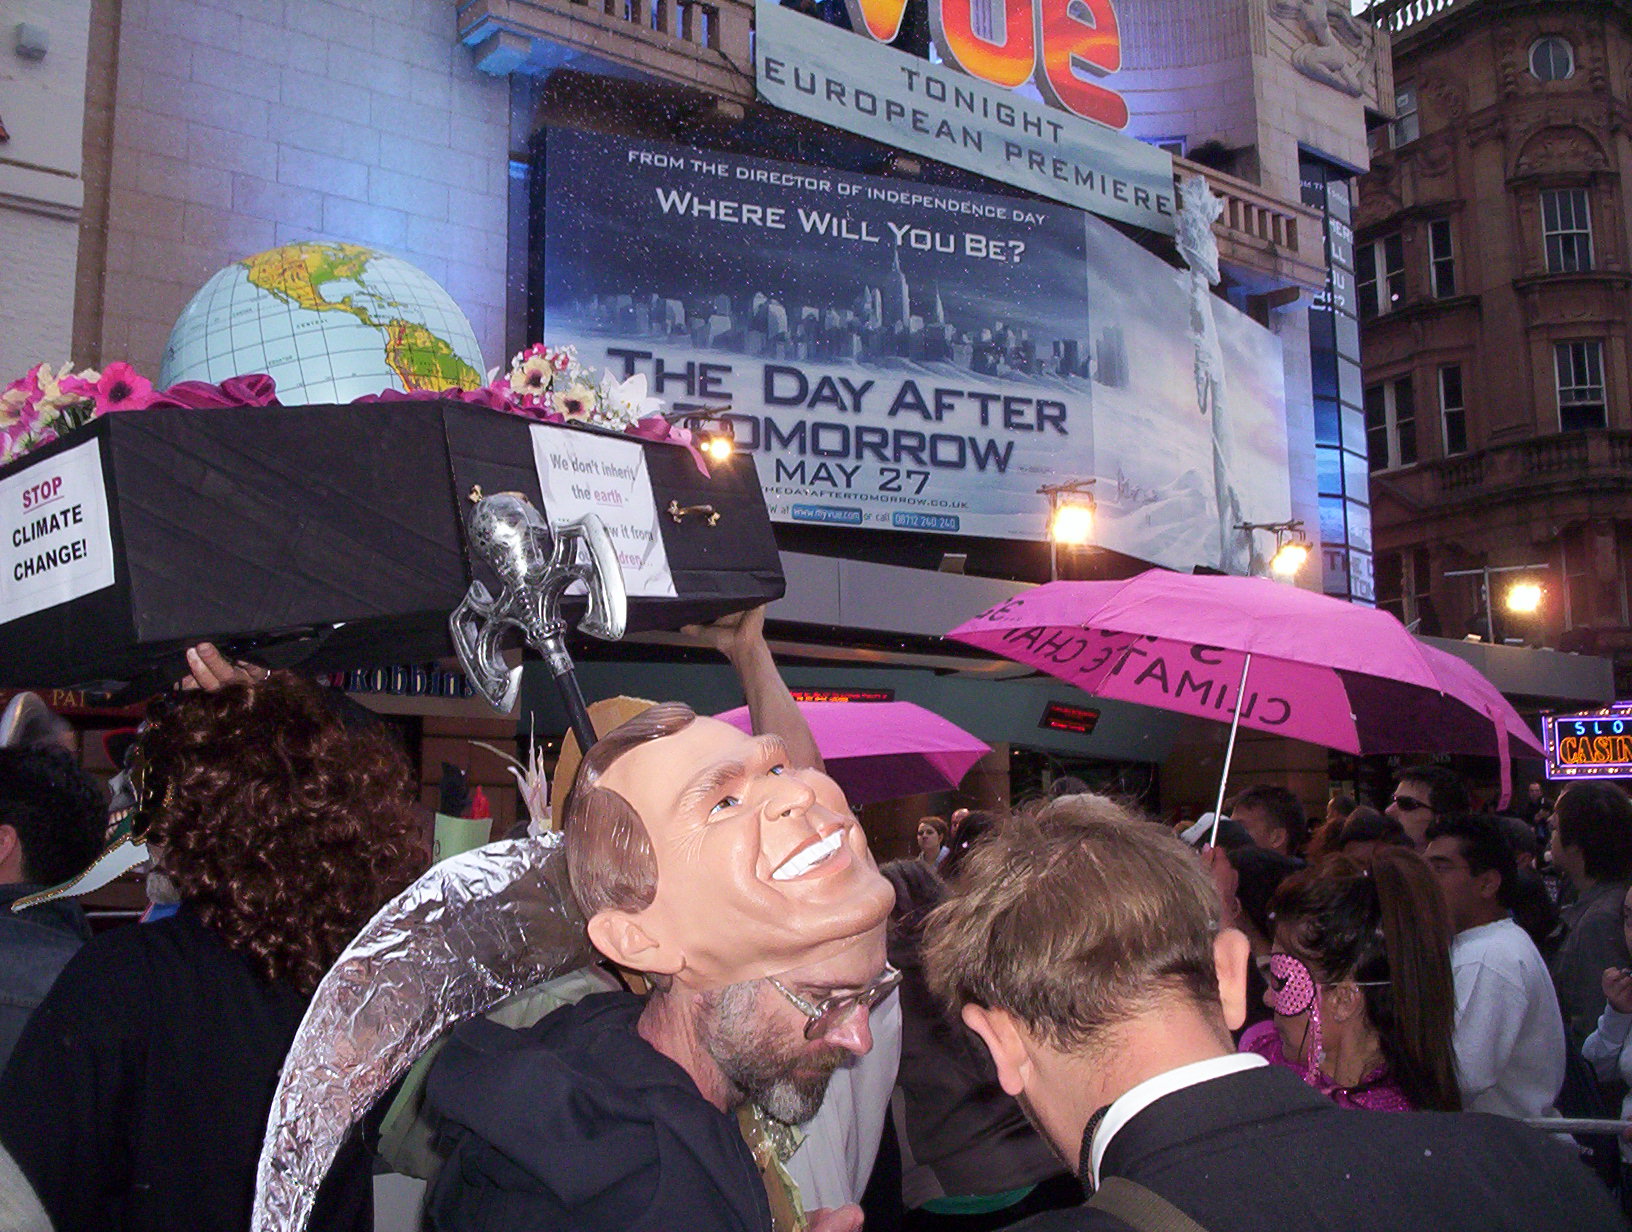 The Campaign against Climate Change was in on the act at the Film Premiere